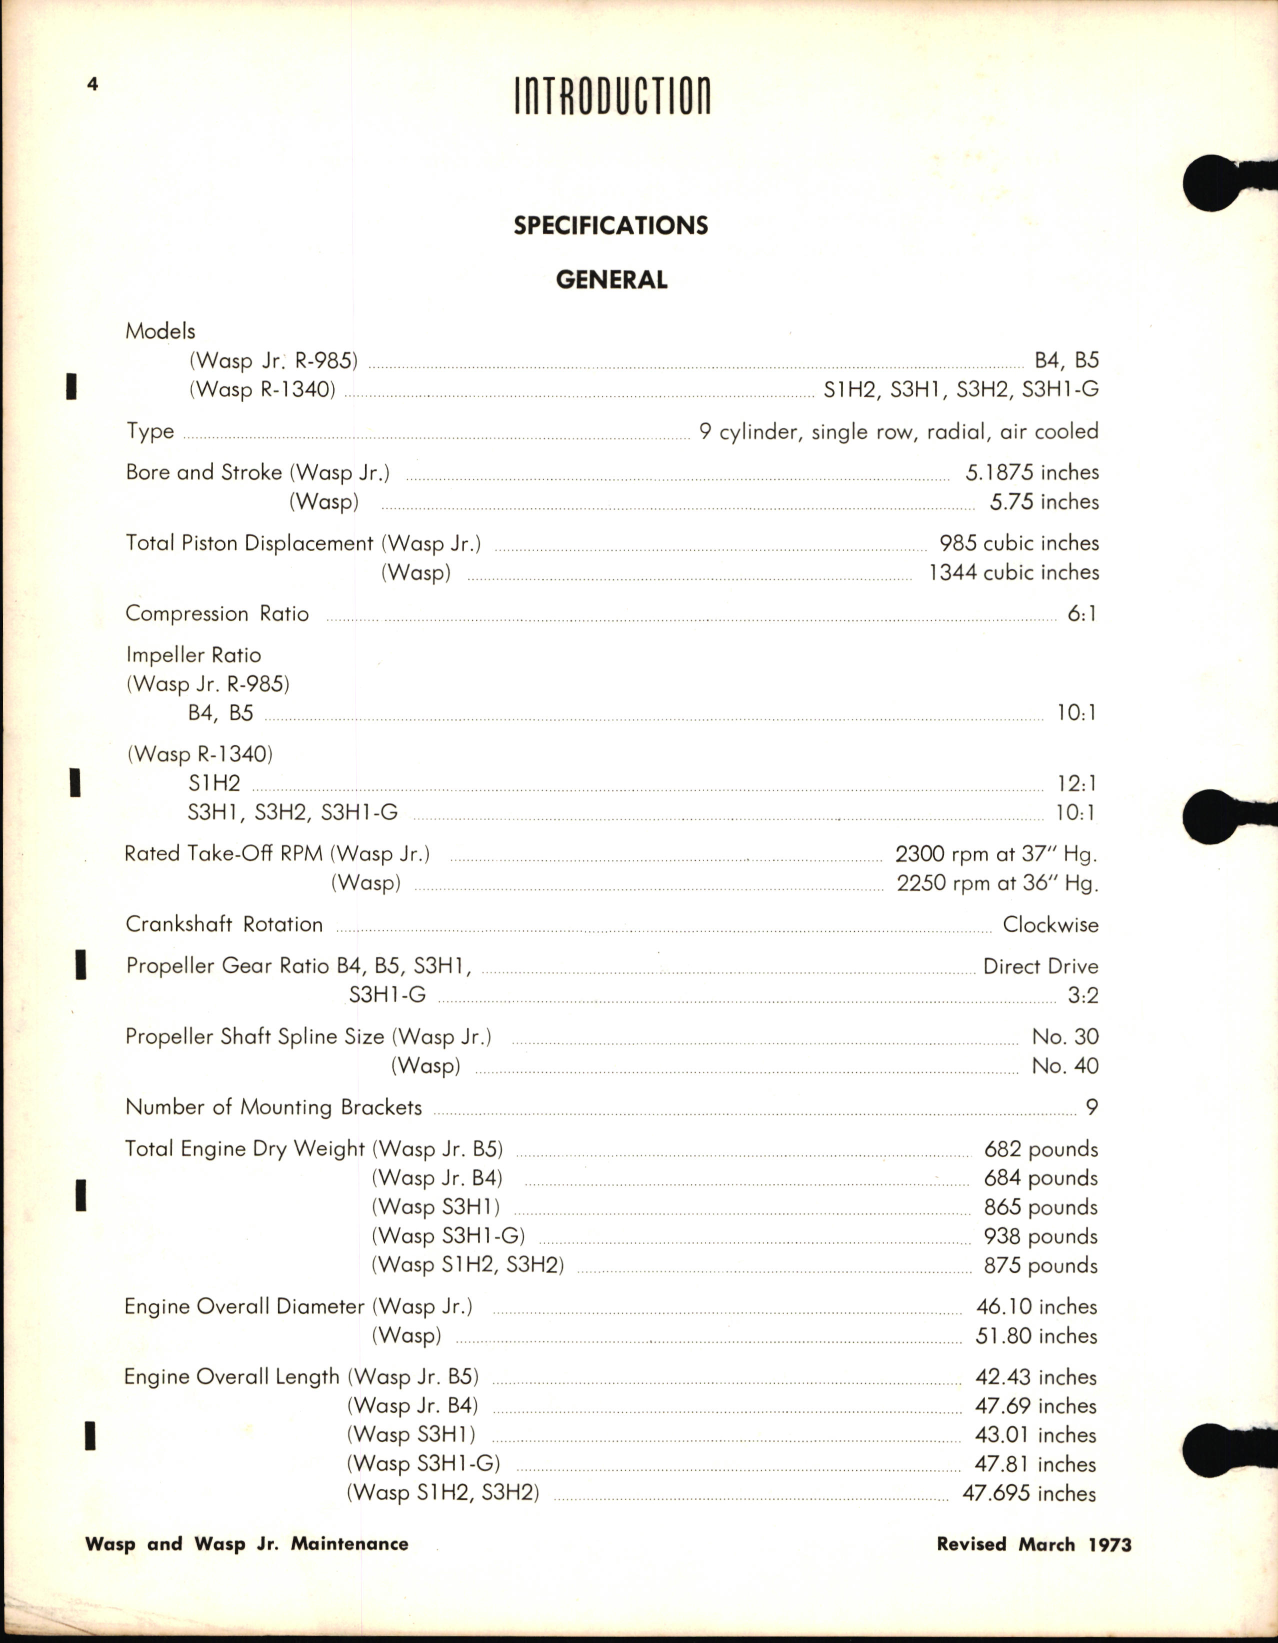 Sample page 8 from AirCorps Library document: Maintenance Manual for Wasp Jr. and Wasp Engines